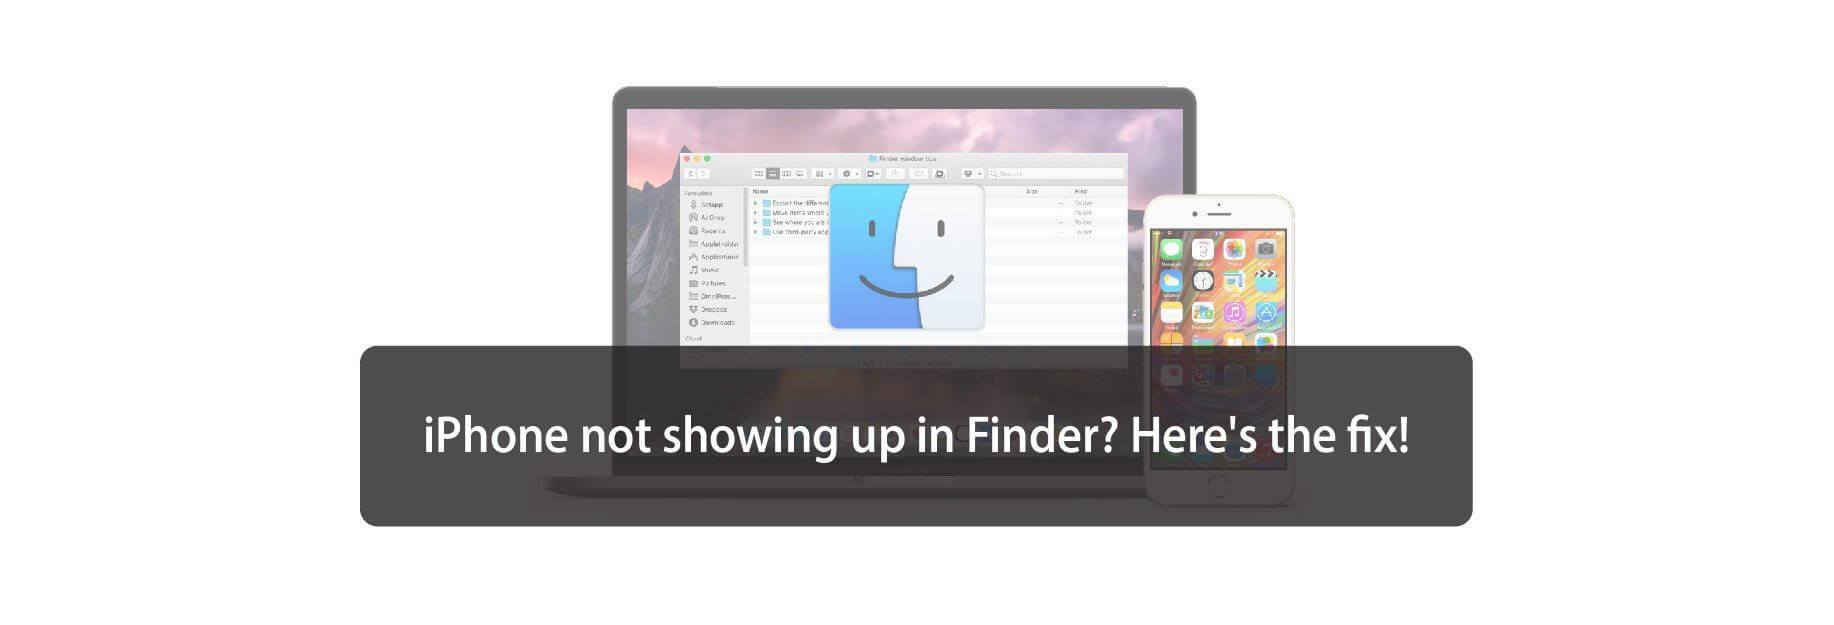 iPhone not showing up in Finder? Here's the fix!